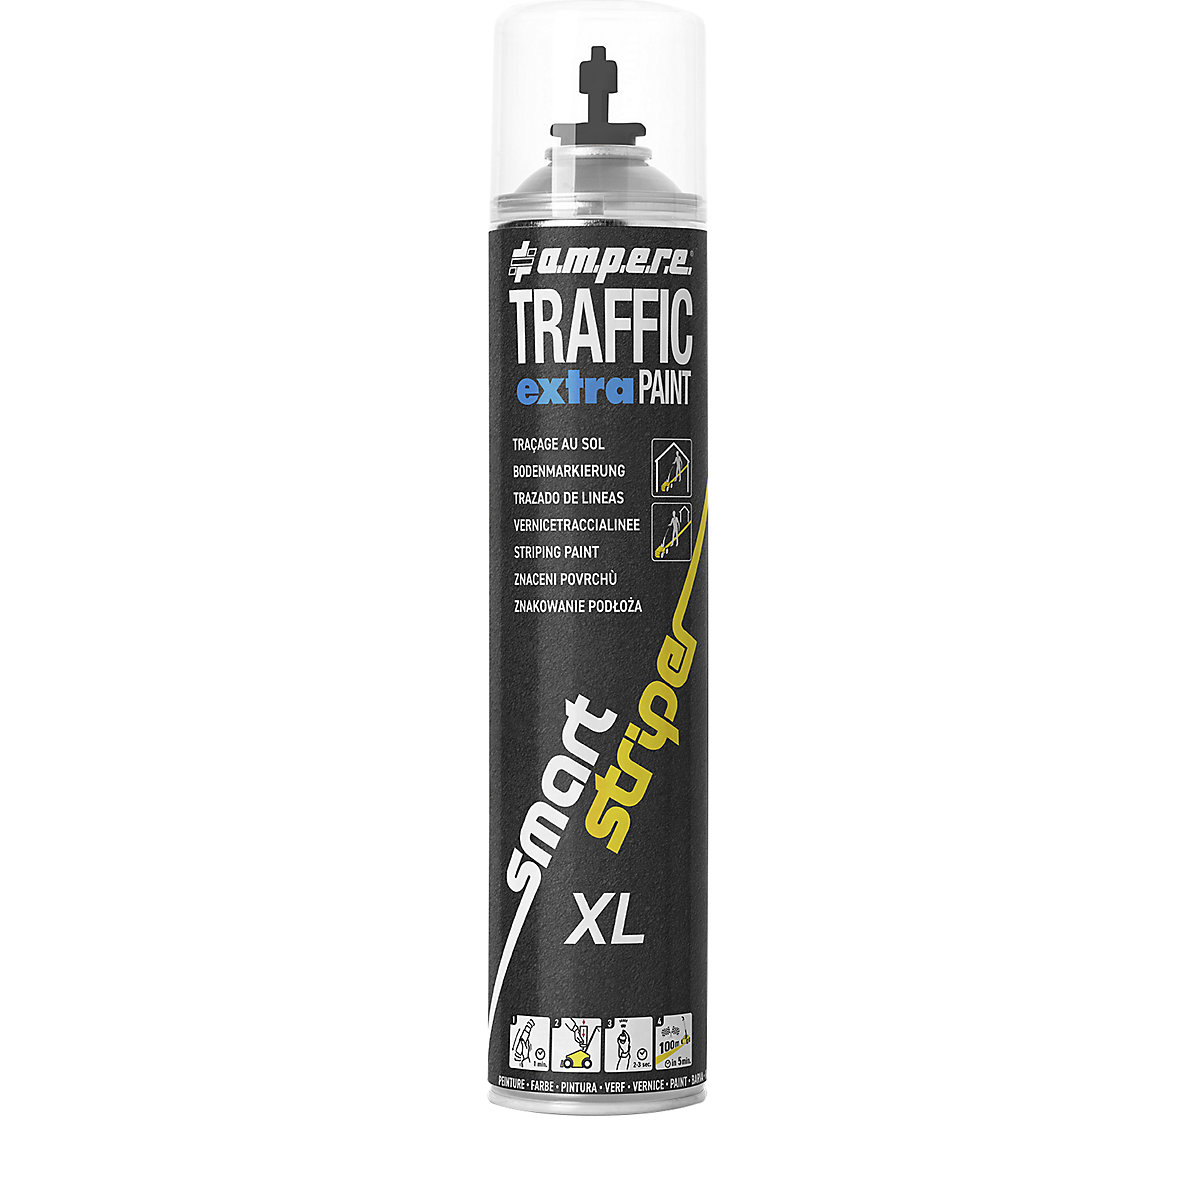 Vernice traccialinee Traffic extra Paint® XL – Ampere